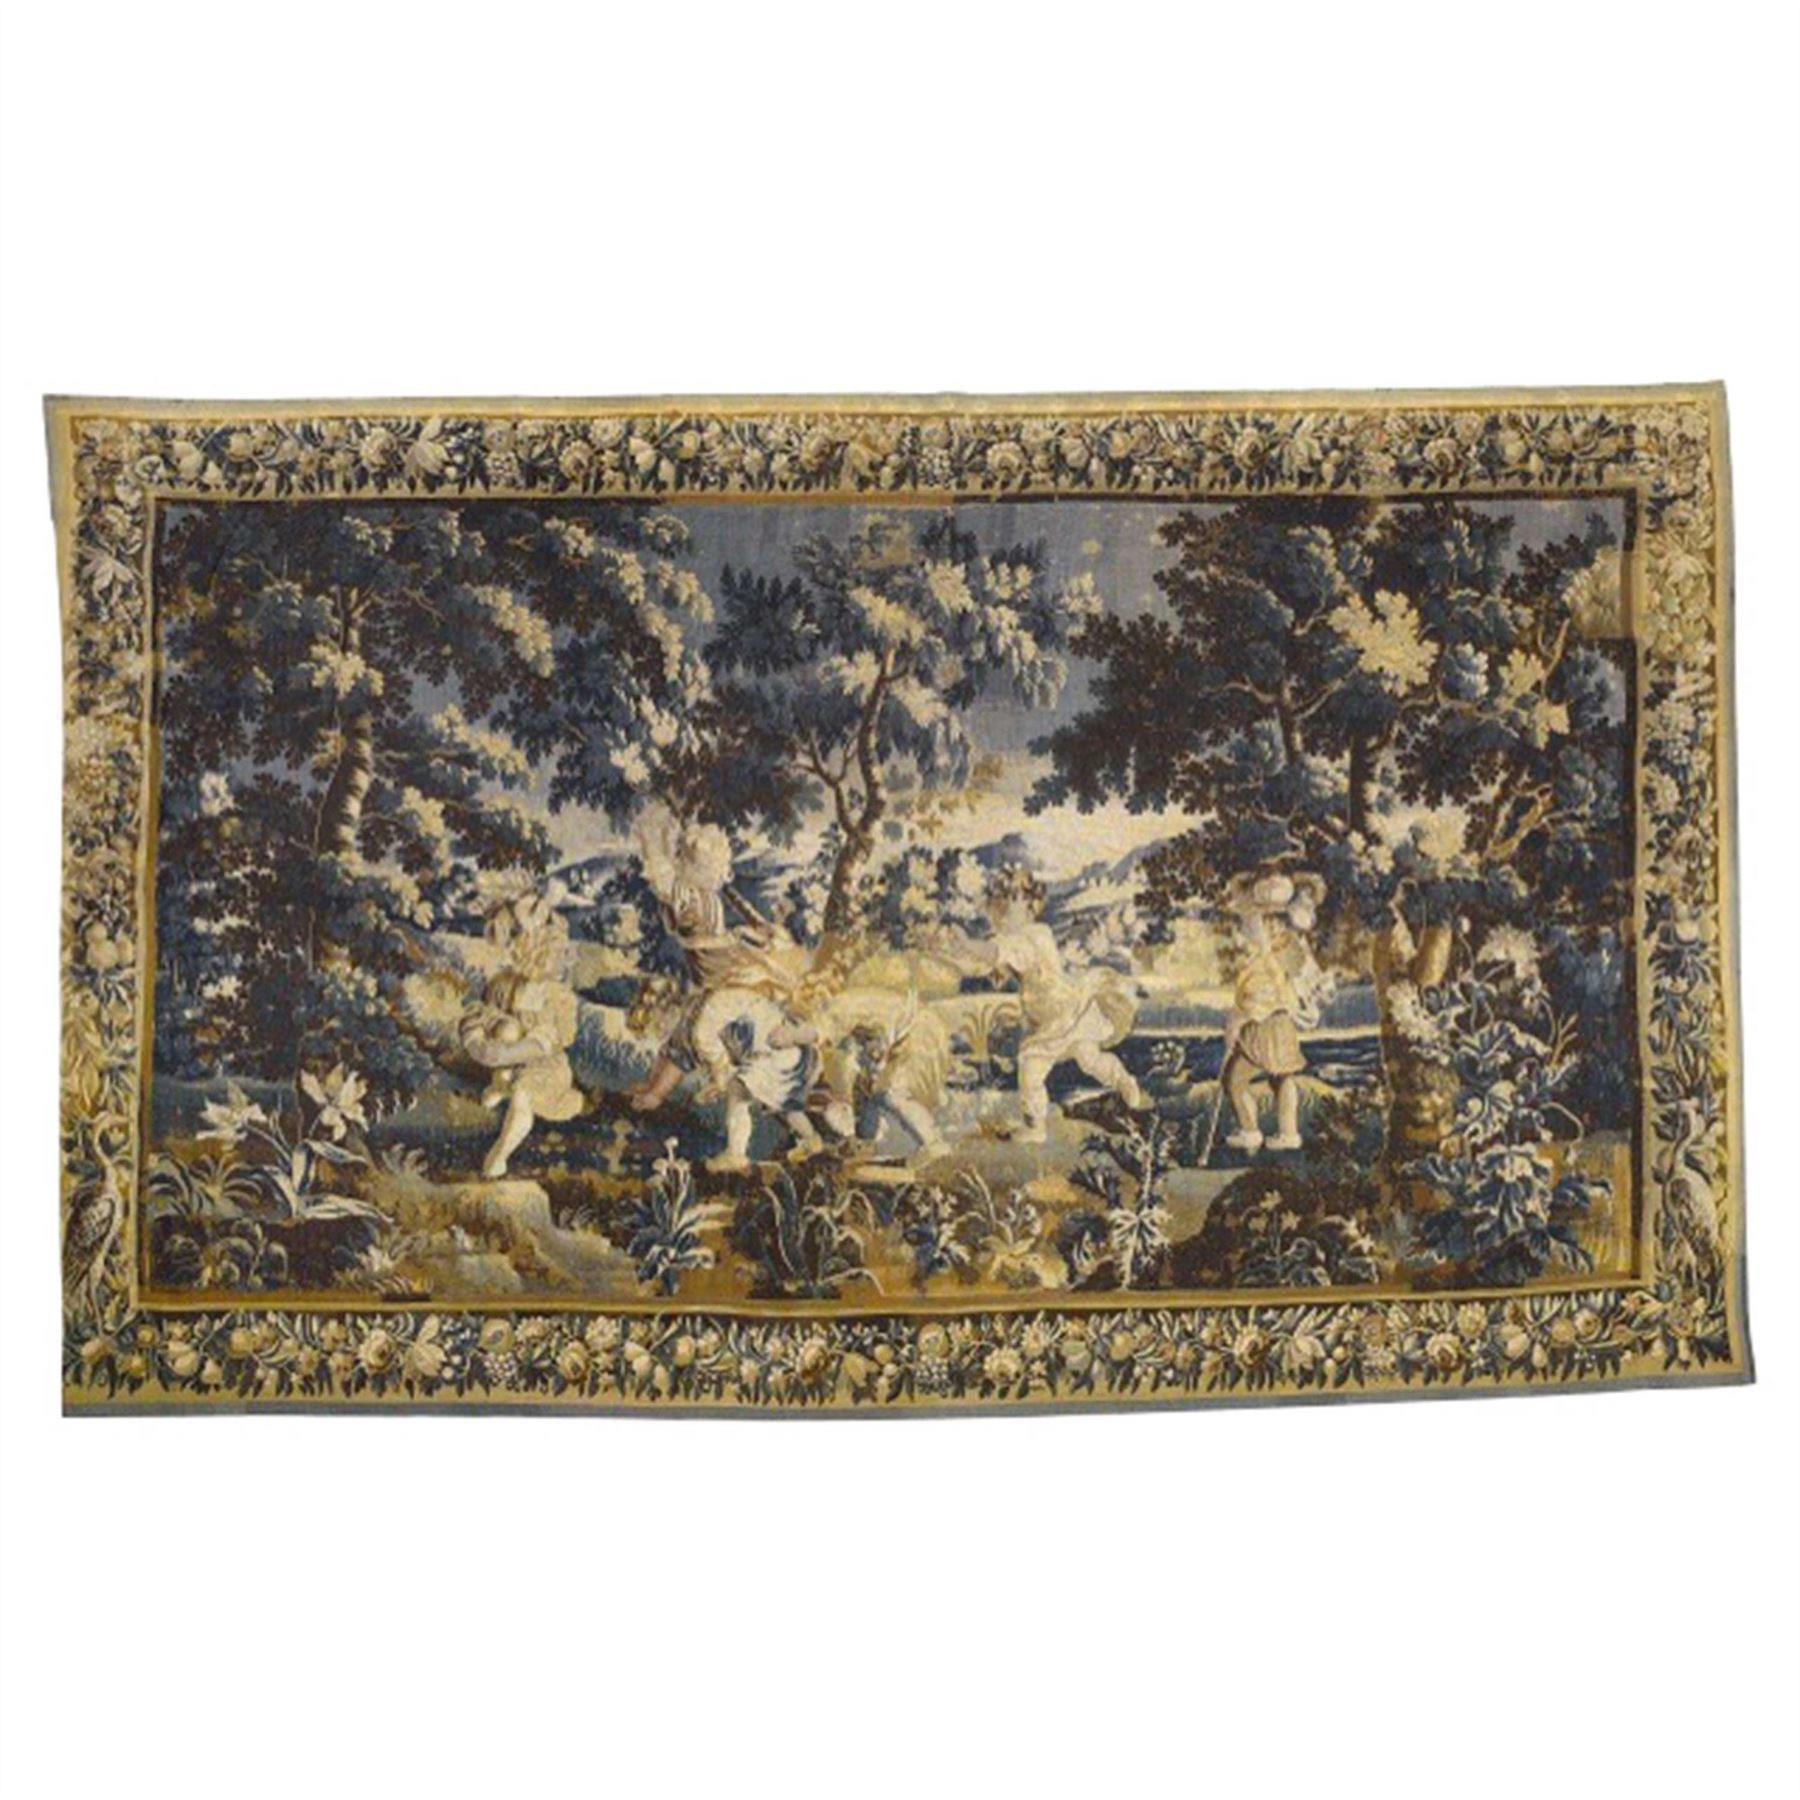 An impressive and decorative Aubusson Verdure tapestry circa 1730, with an extremely fine border decorated with flowers and leaves. Depicting children at play in an idealised woodland landscape. The lower border, early restoration and renewal.